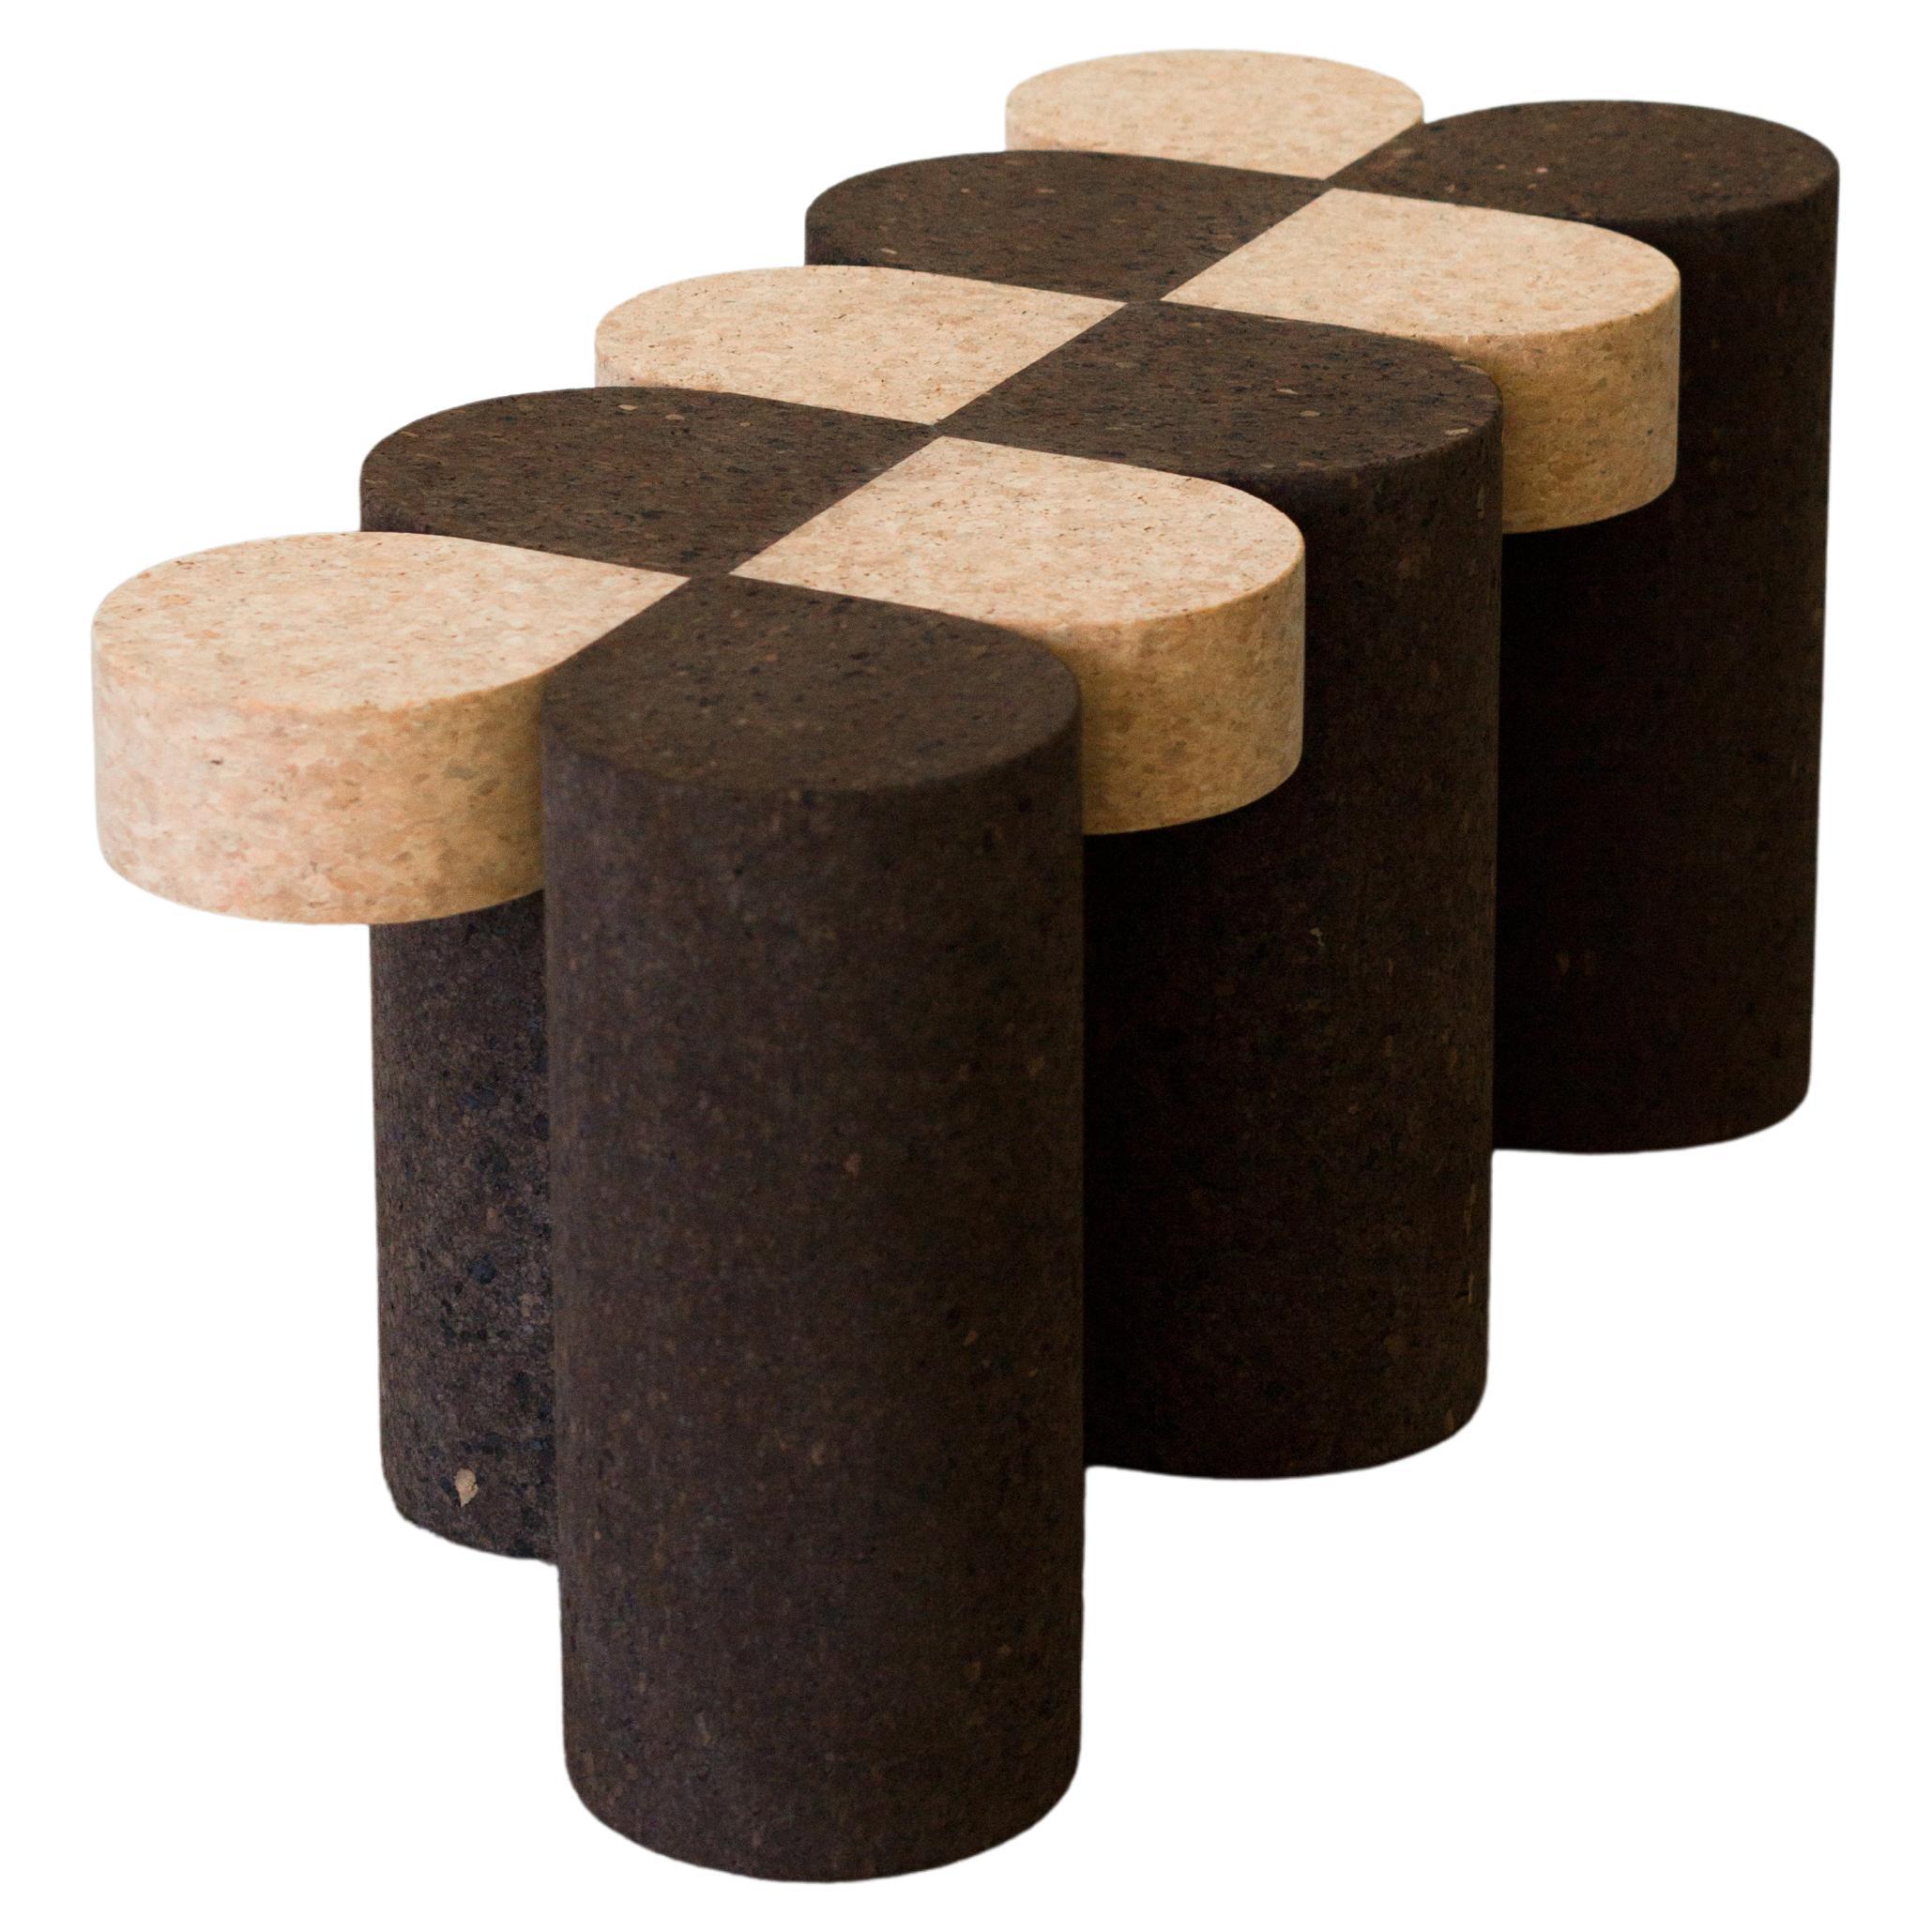 Clover Solid Cork Contemporary Sculptural Carved Side Table Large Mix For Sale